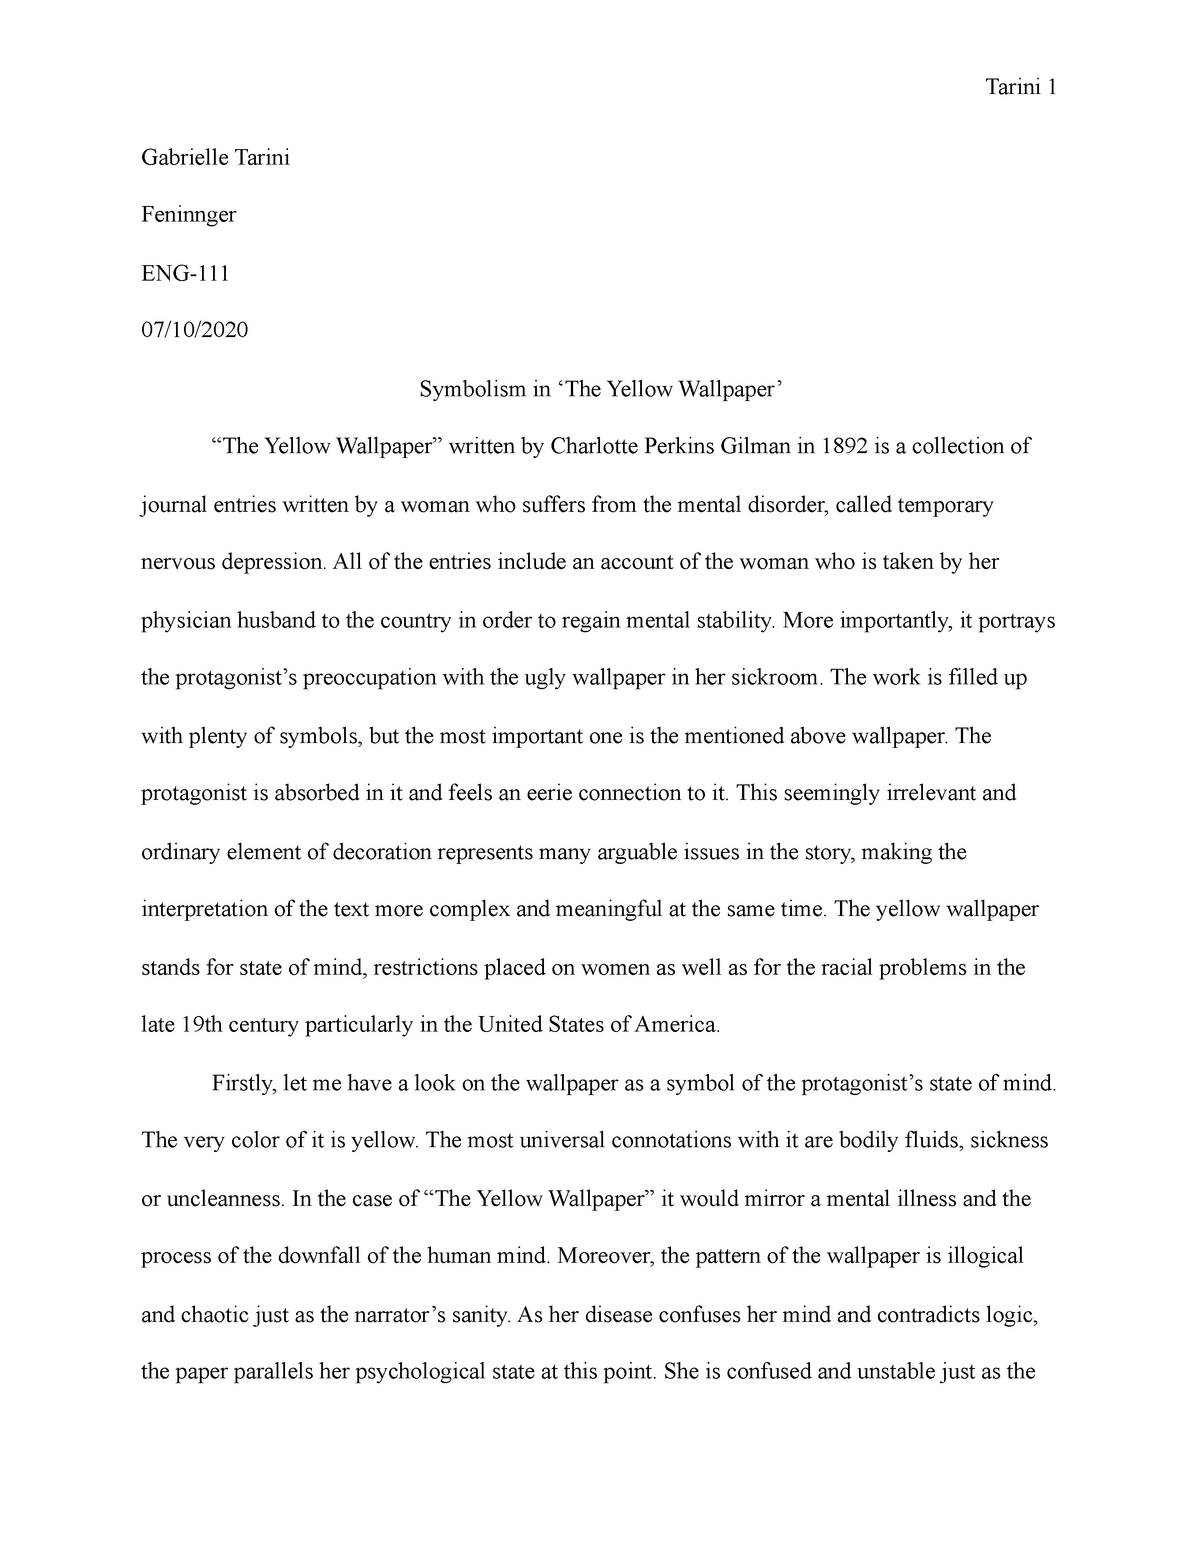 The yellow wallpaper - literary analysis essay about the symbolism used by  the author - Gabrielle - Studocu